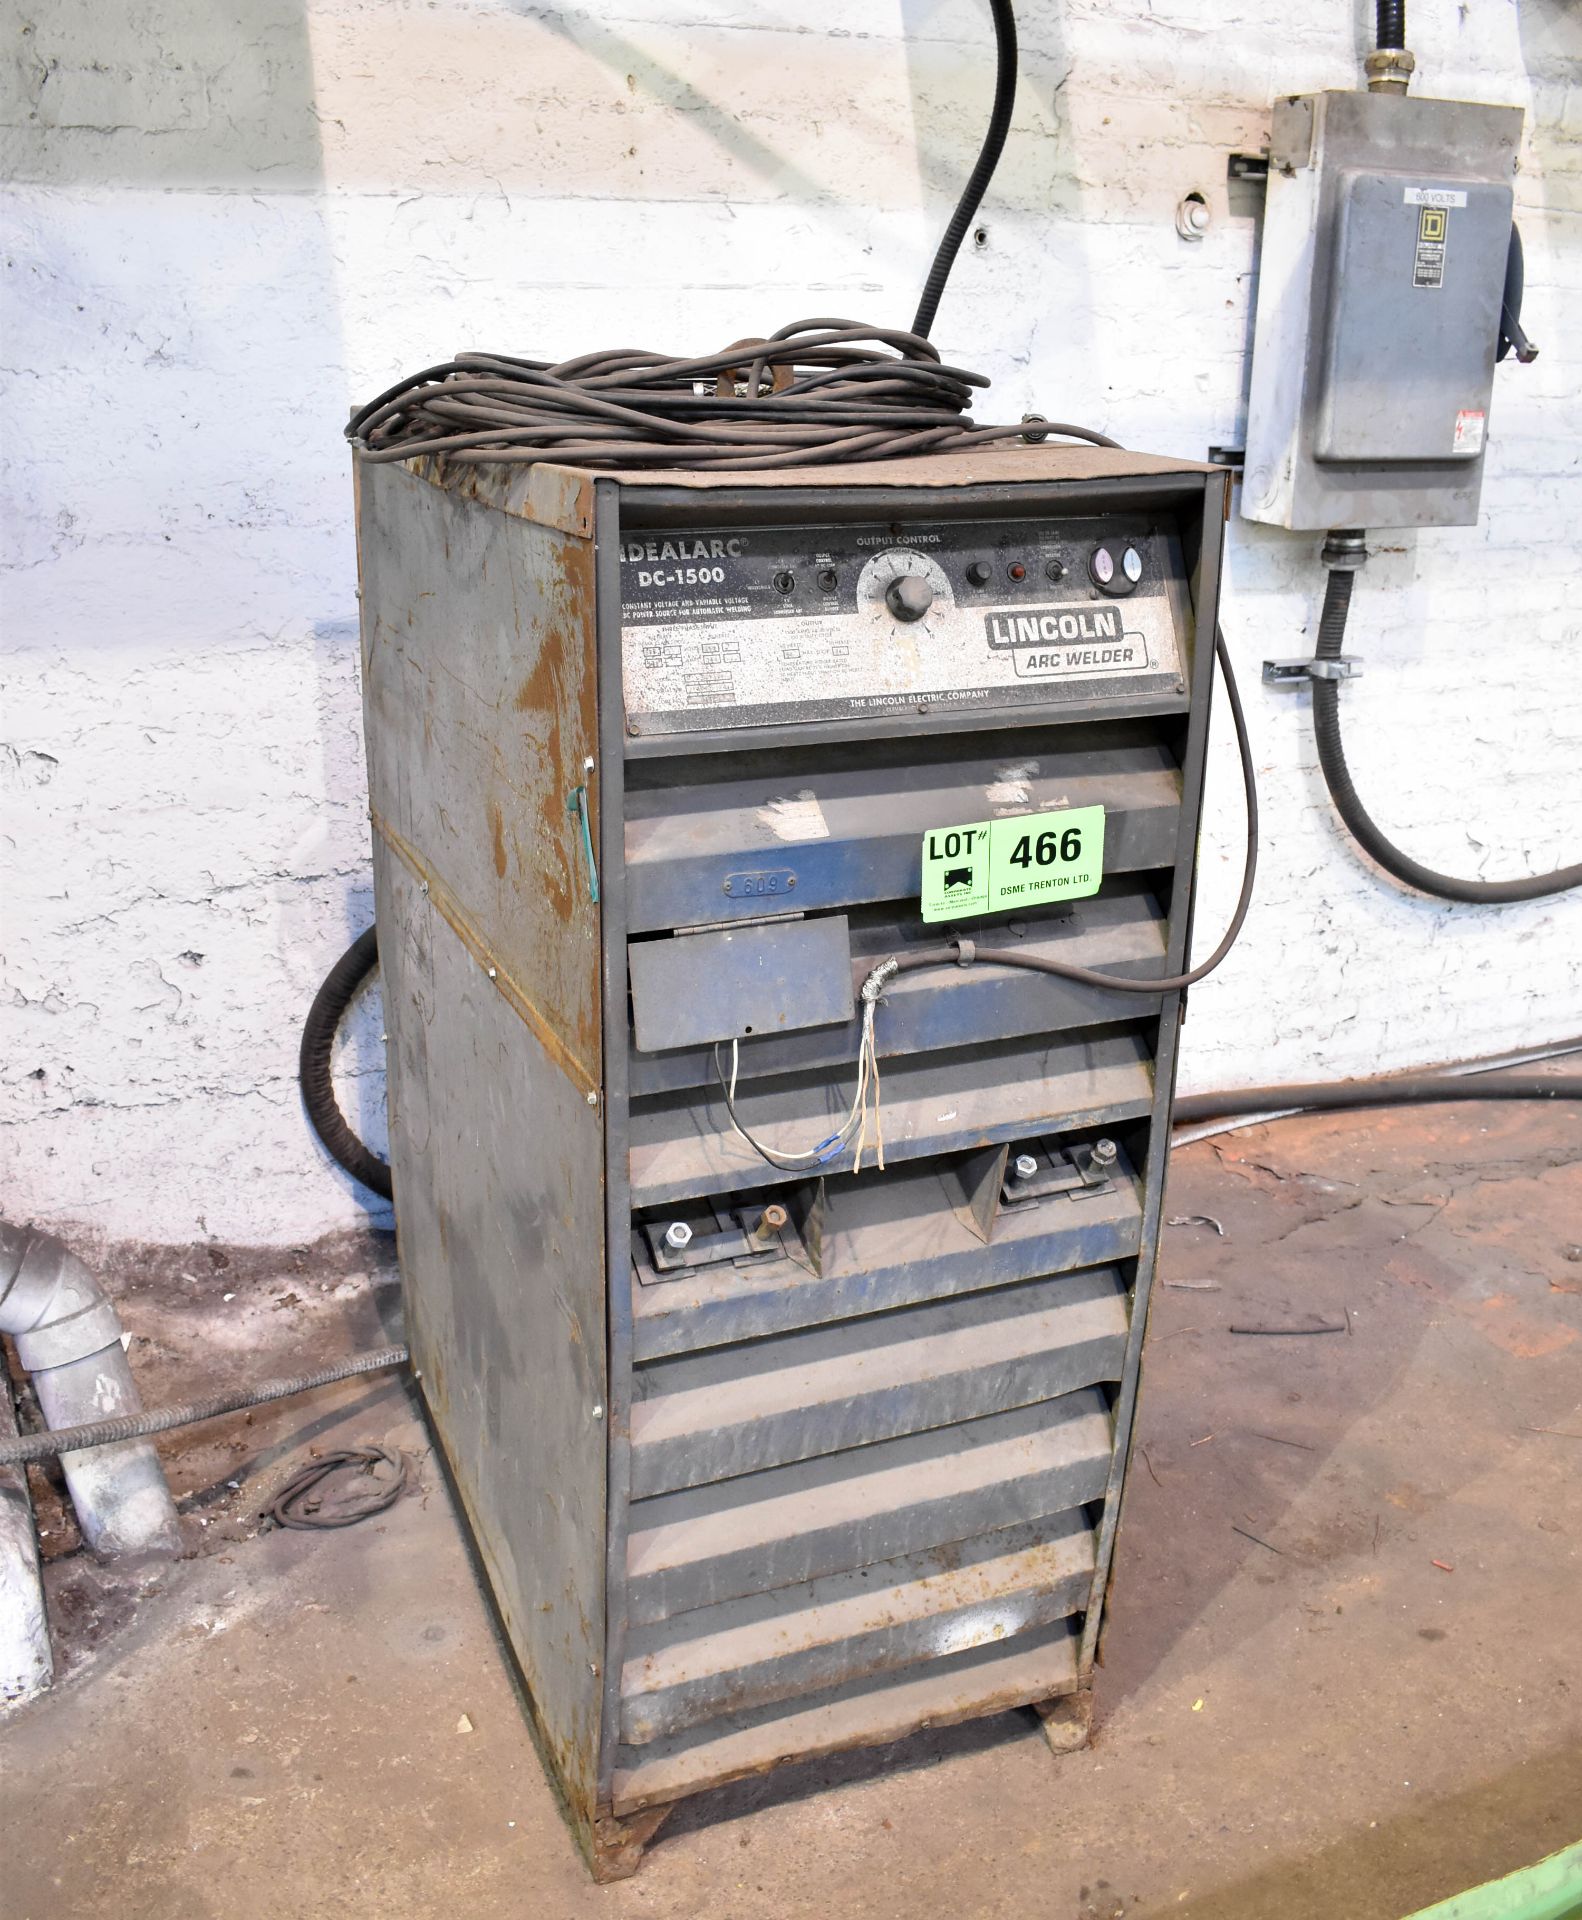 LINCOLN IDEALARC DC1500 WELDING POWER SOURCE (CI) [RIGGING FEE FOR LOT# 466 - $40 USD +PLUS TAXES]